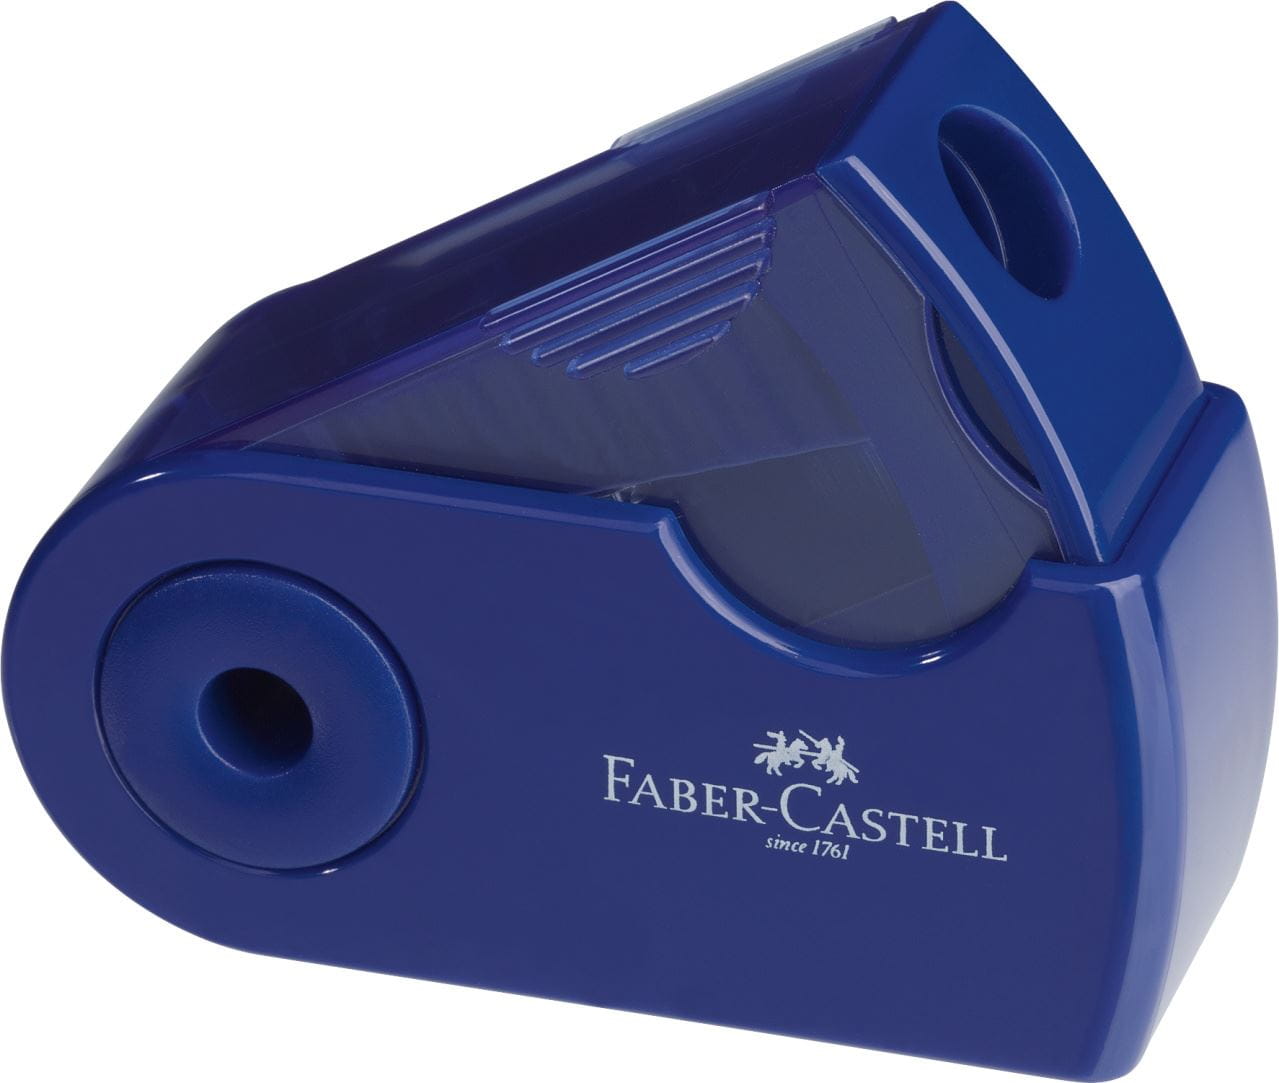 Faber-Castell - Sleeve Mini sharpening box, red/blue, sorted